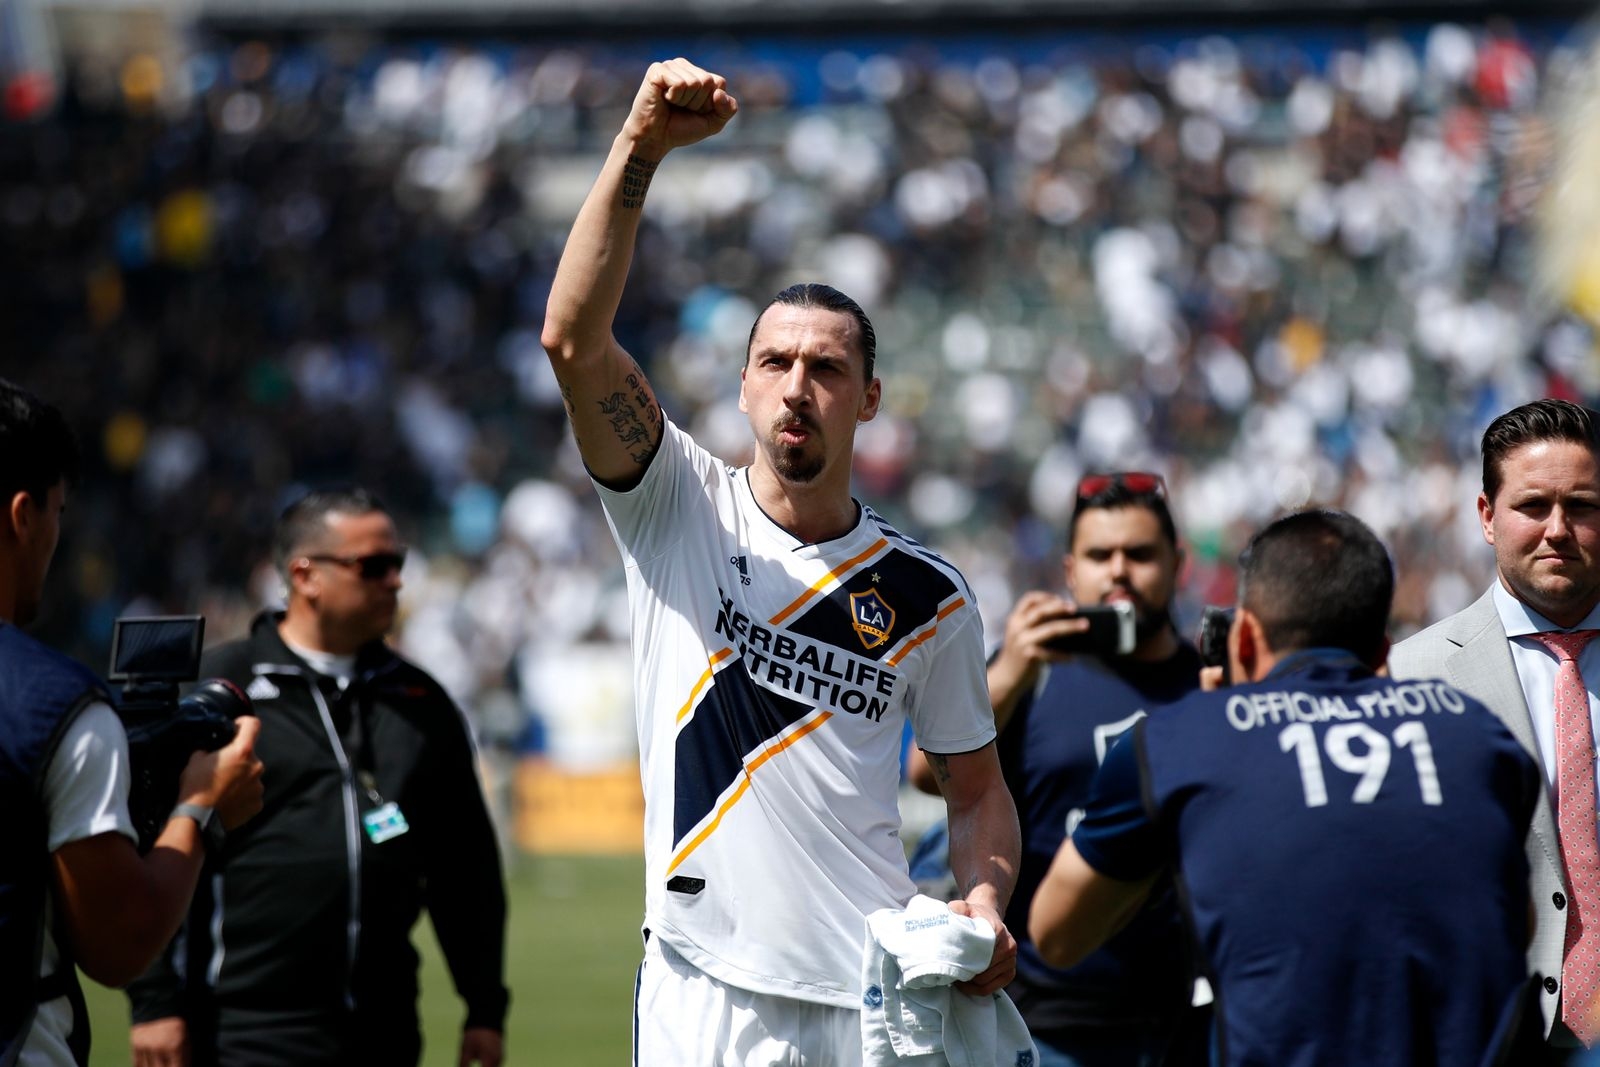 Los Angeles Galaxy's Zlatan Ibrahimovic, of Sweden, acknowledges the fans as he walks off the field after an MLS soccer match against the Los Angeles FC Saturday, March 31, 2018, in Carson, Calif. The Galaxy won 4-3. (AP Photo/Jae C. Hong)